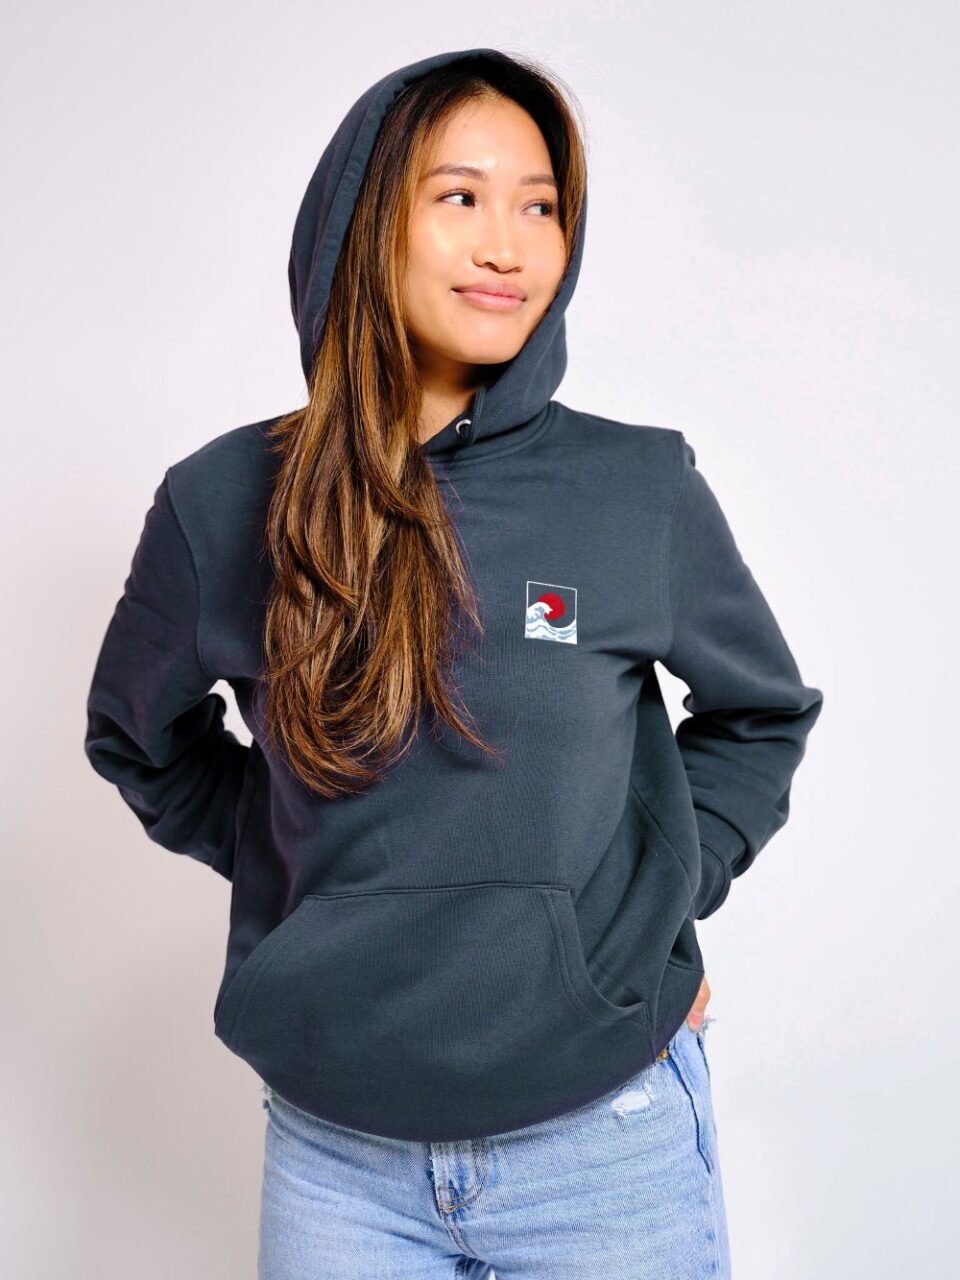 STROM Clothing - Hoodie - Japan Collection